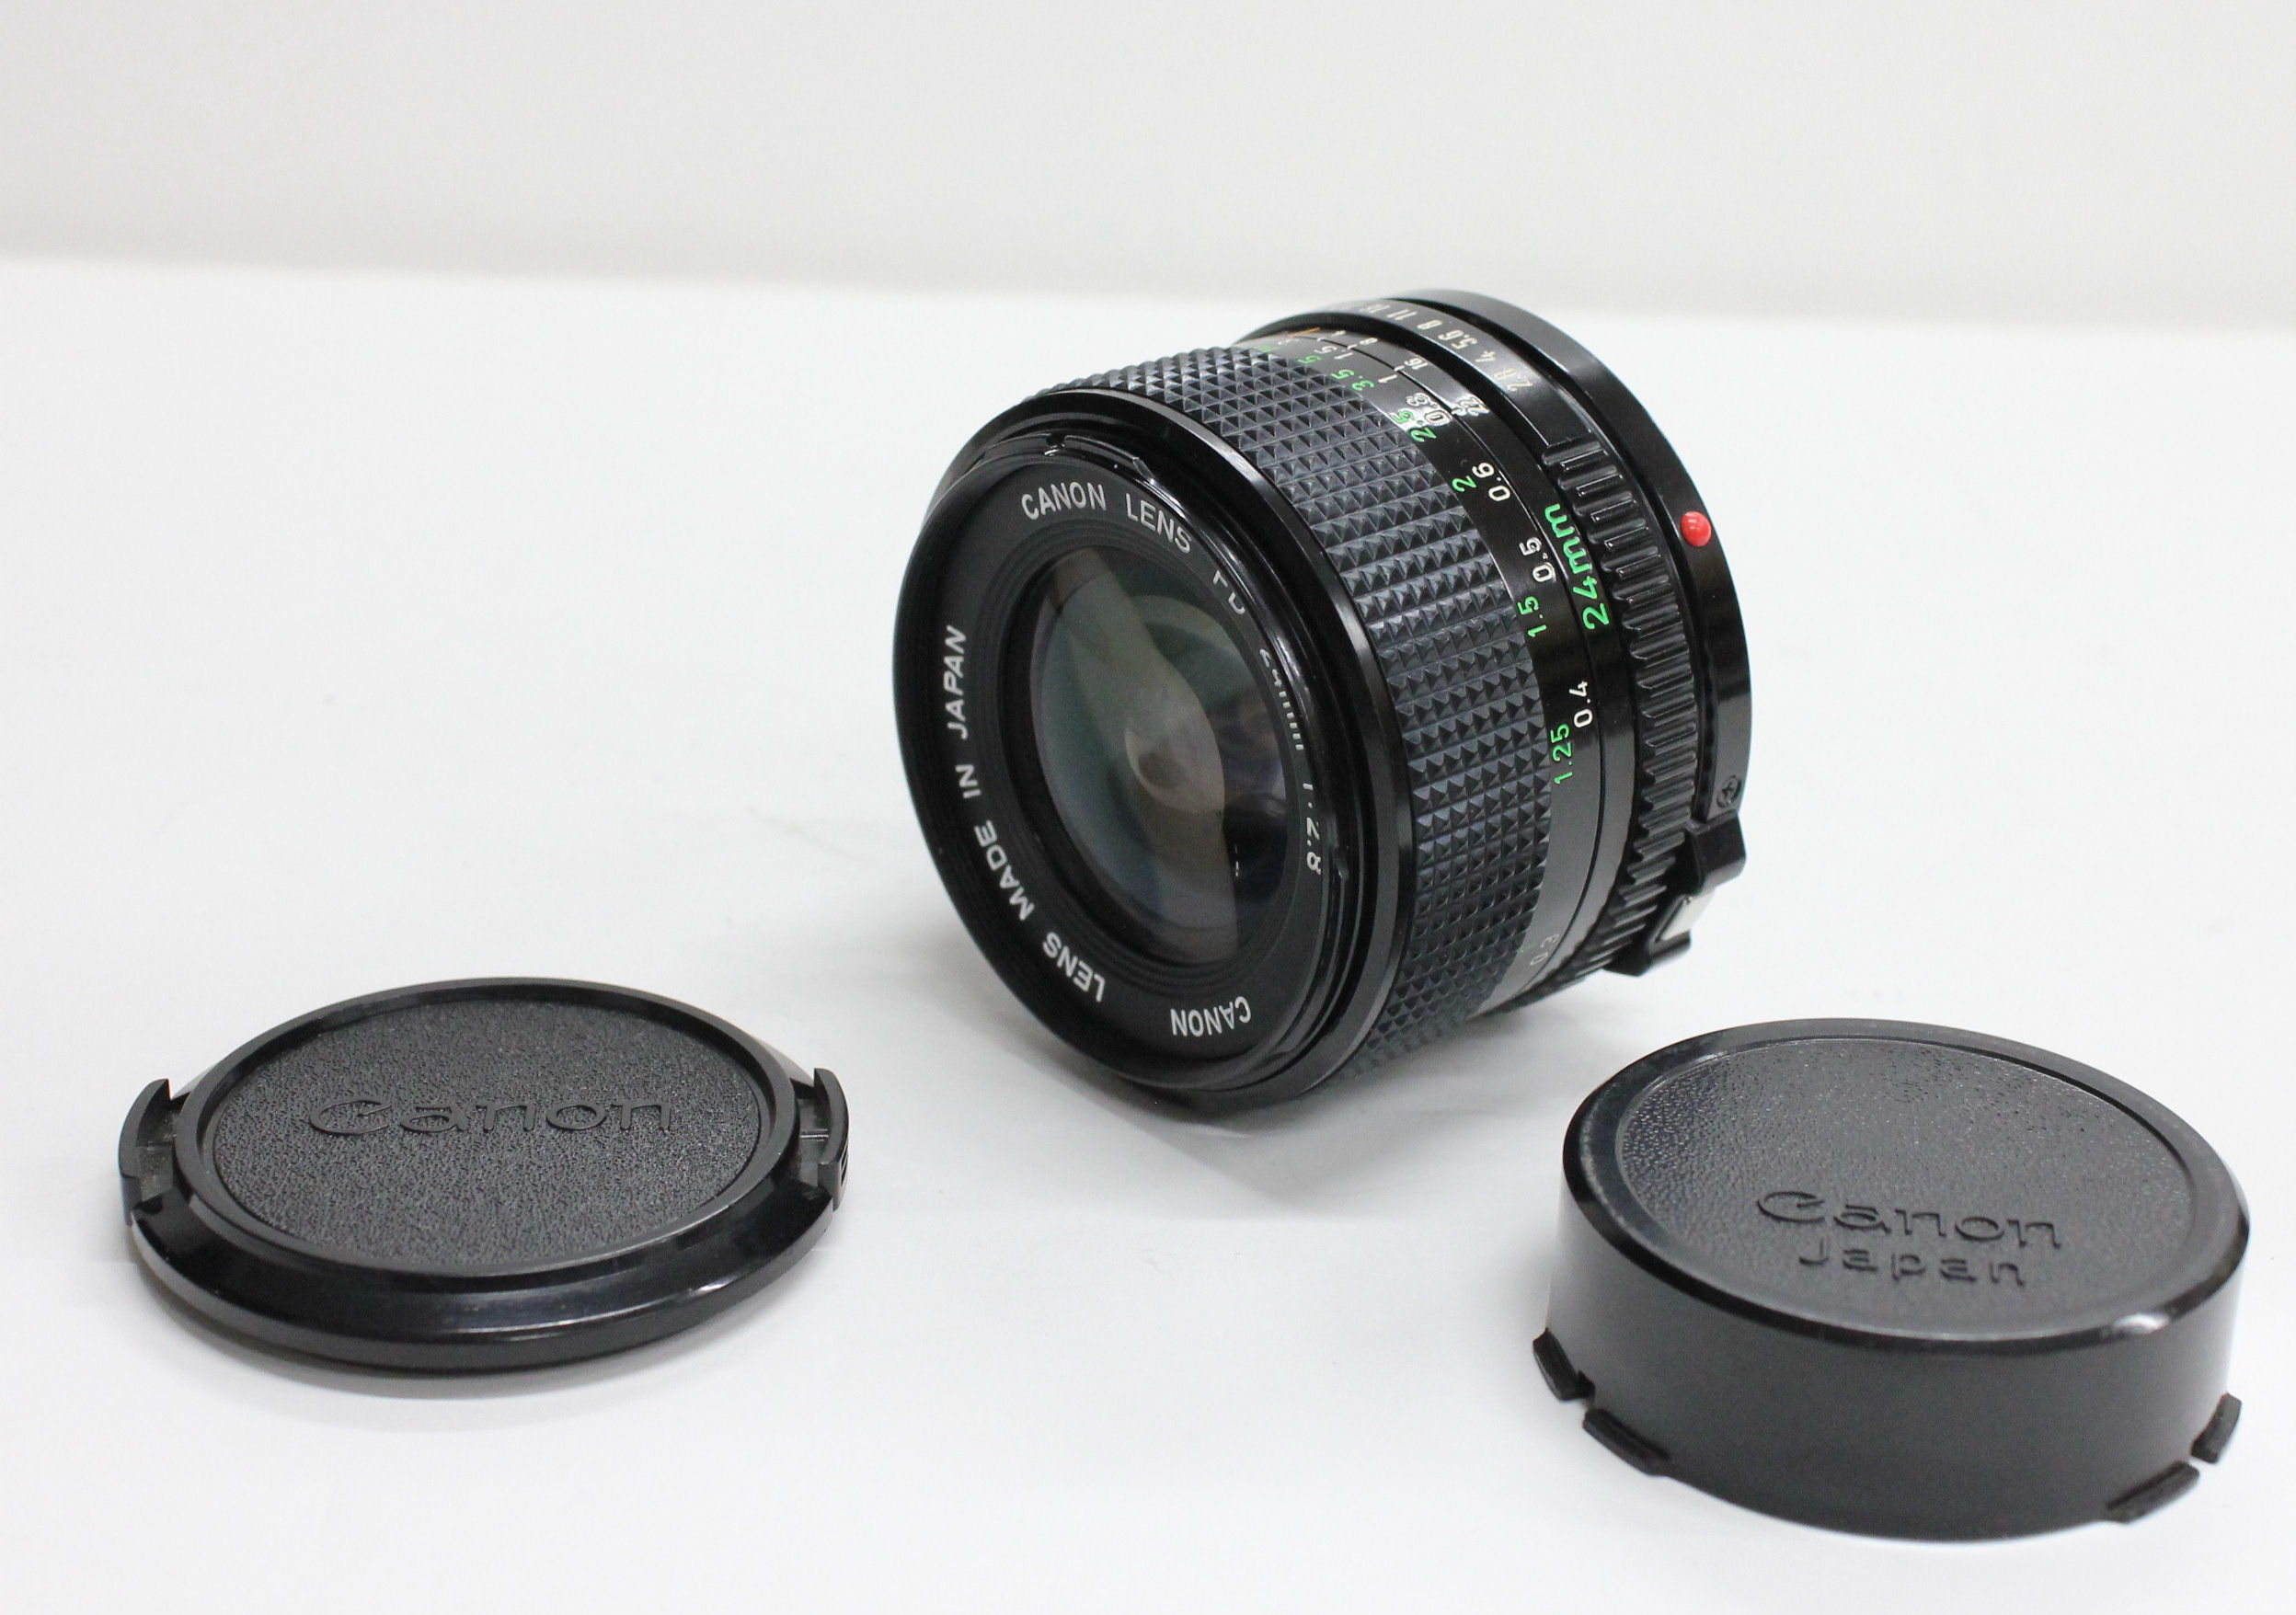 Japan Used Camera Shop | [Mint] Canon NEW FD 24mm F2.8 Lens from Japan